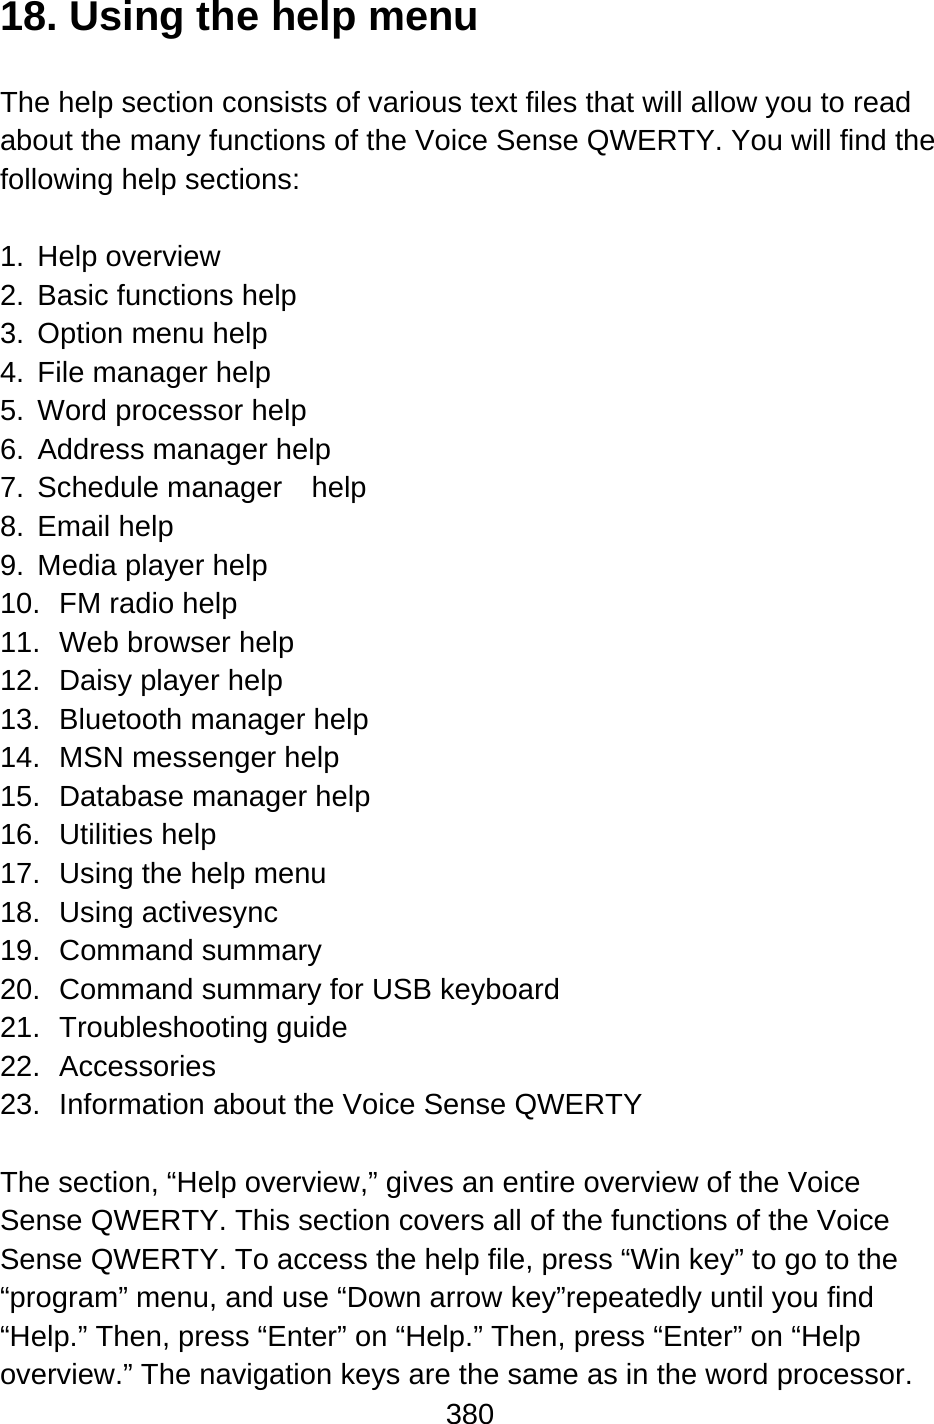 380  18. Using the help menu  The help section consists of various text files that will allow you to read about the many functions of the Voice Sense QWERTY. You will find the following help sections:  1. Help overview 2.  Basic functions help 3.  Option menu help 4.  File manager help 5.  Word processor help 6.  Address manager help 7. Schedule manager  help 8. Email help 9.  Media player help 10. FM radio help 11.  Web browser help 12.  Daisy player help 13.  Bluetooth manager help 14. MSN messenger help 15.  Database manager help 16. Utilities help 17.  Using the help menu 18. Using activesync 19. Command summary 20.  Command summary for USB keyboard 21. Troubleshooting guide 22. Accessories 23.  Information about the Voice Sense QWERTY  The section, “Help overview,” gives an entire overview of the Voice Sense QWERTY. This section covers all of the functions of the Voice Sense QWERTY. To access the help file, press “Win key” to go to the “program” menu, and use “Down arrow key”repeatedly until you find “Help.” Then, press “Enter” on “Help.” Then, press “Enter” on “Help overview.” The navigation keys are the same as in the word processor. 